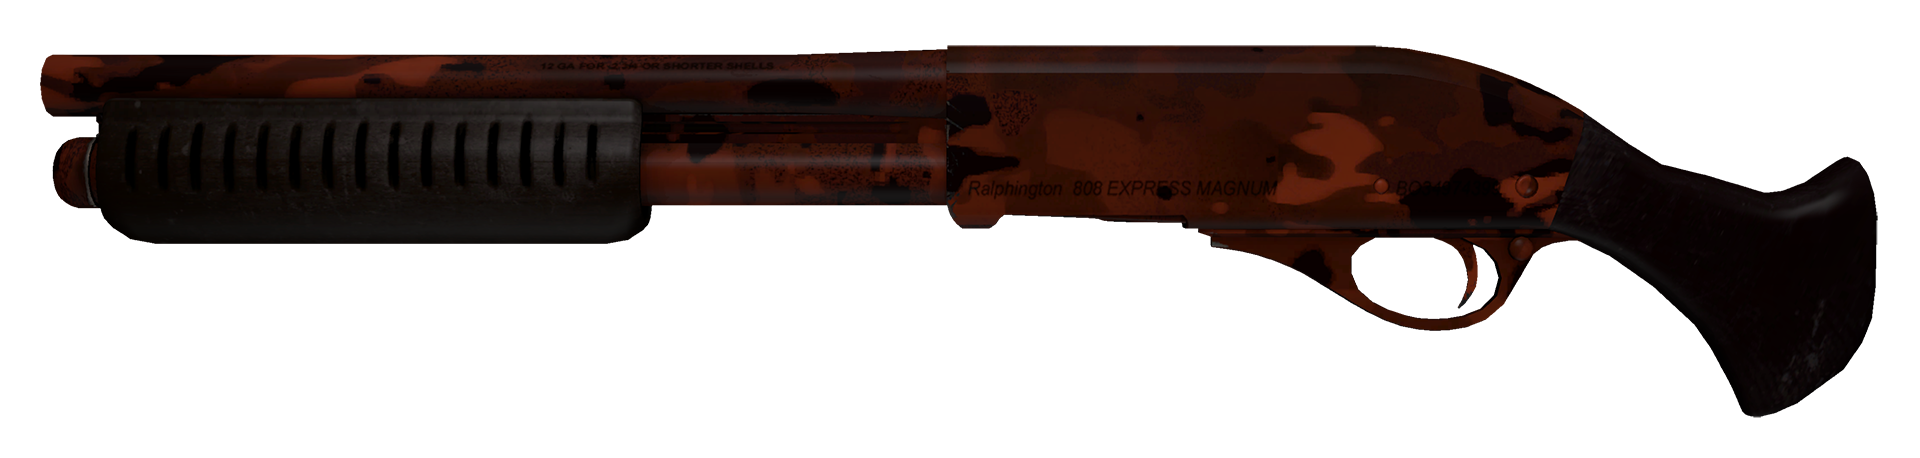 Sawed-Off Full Stop cs go skin download the new for android